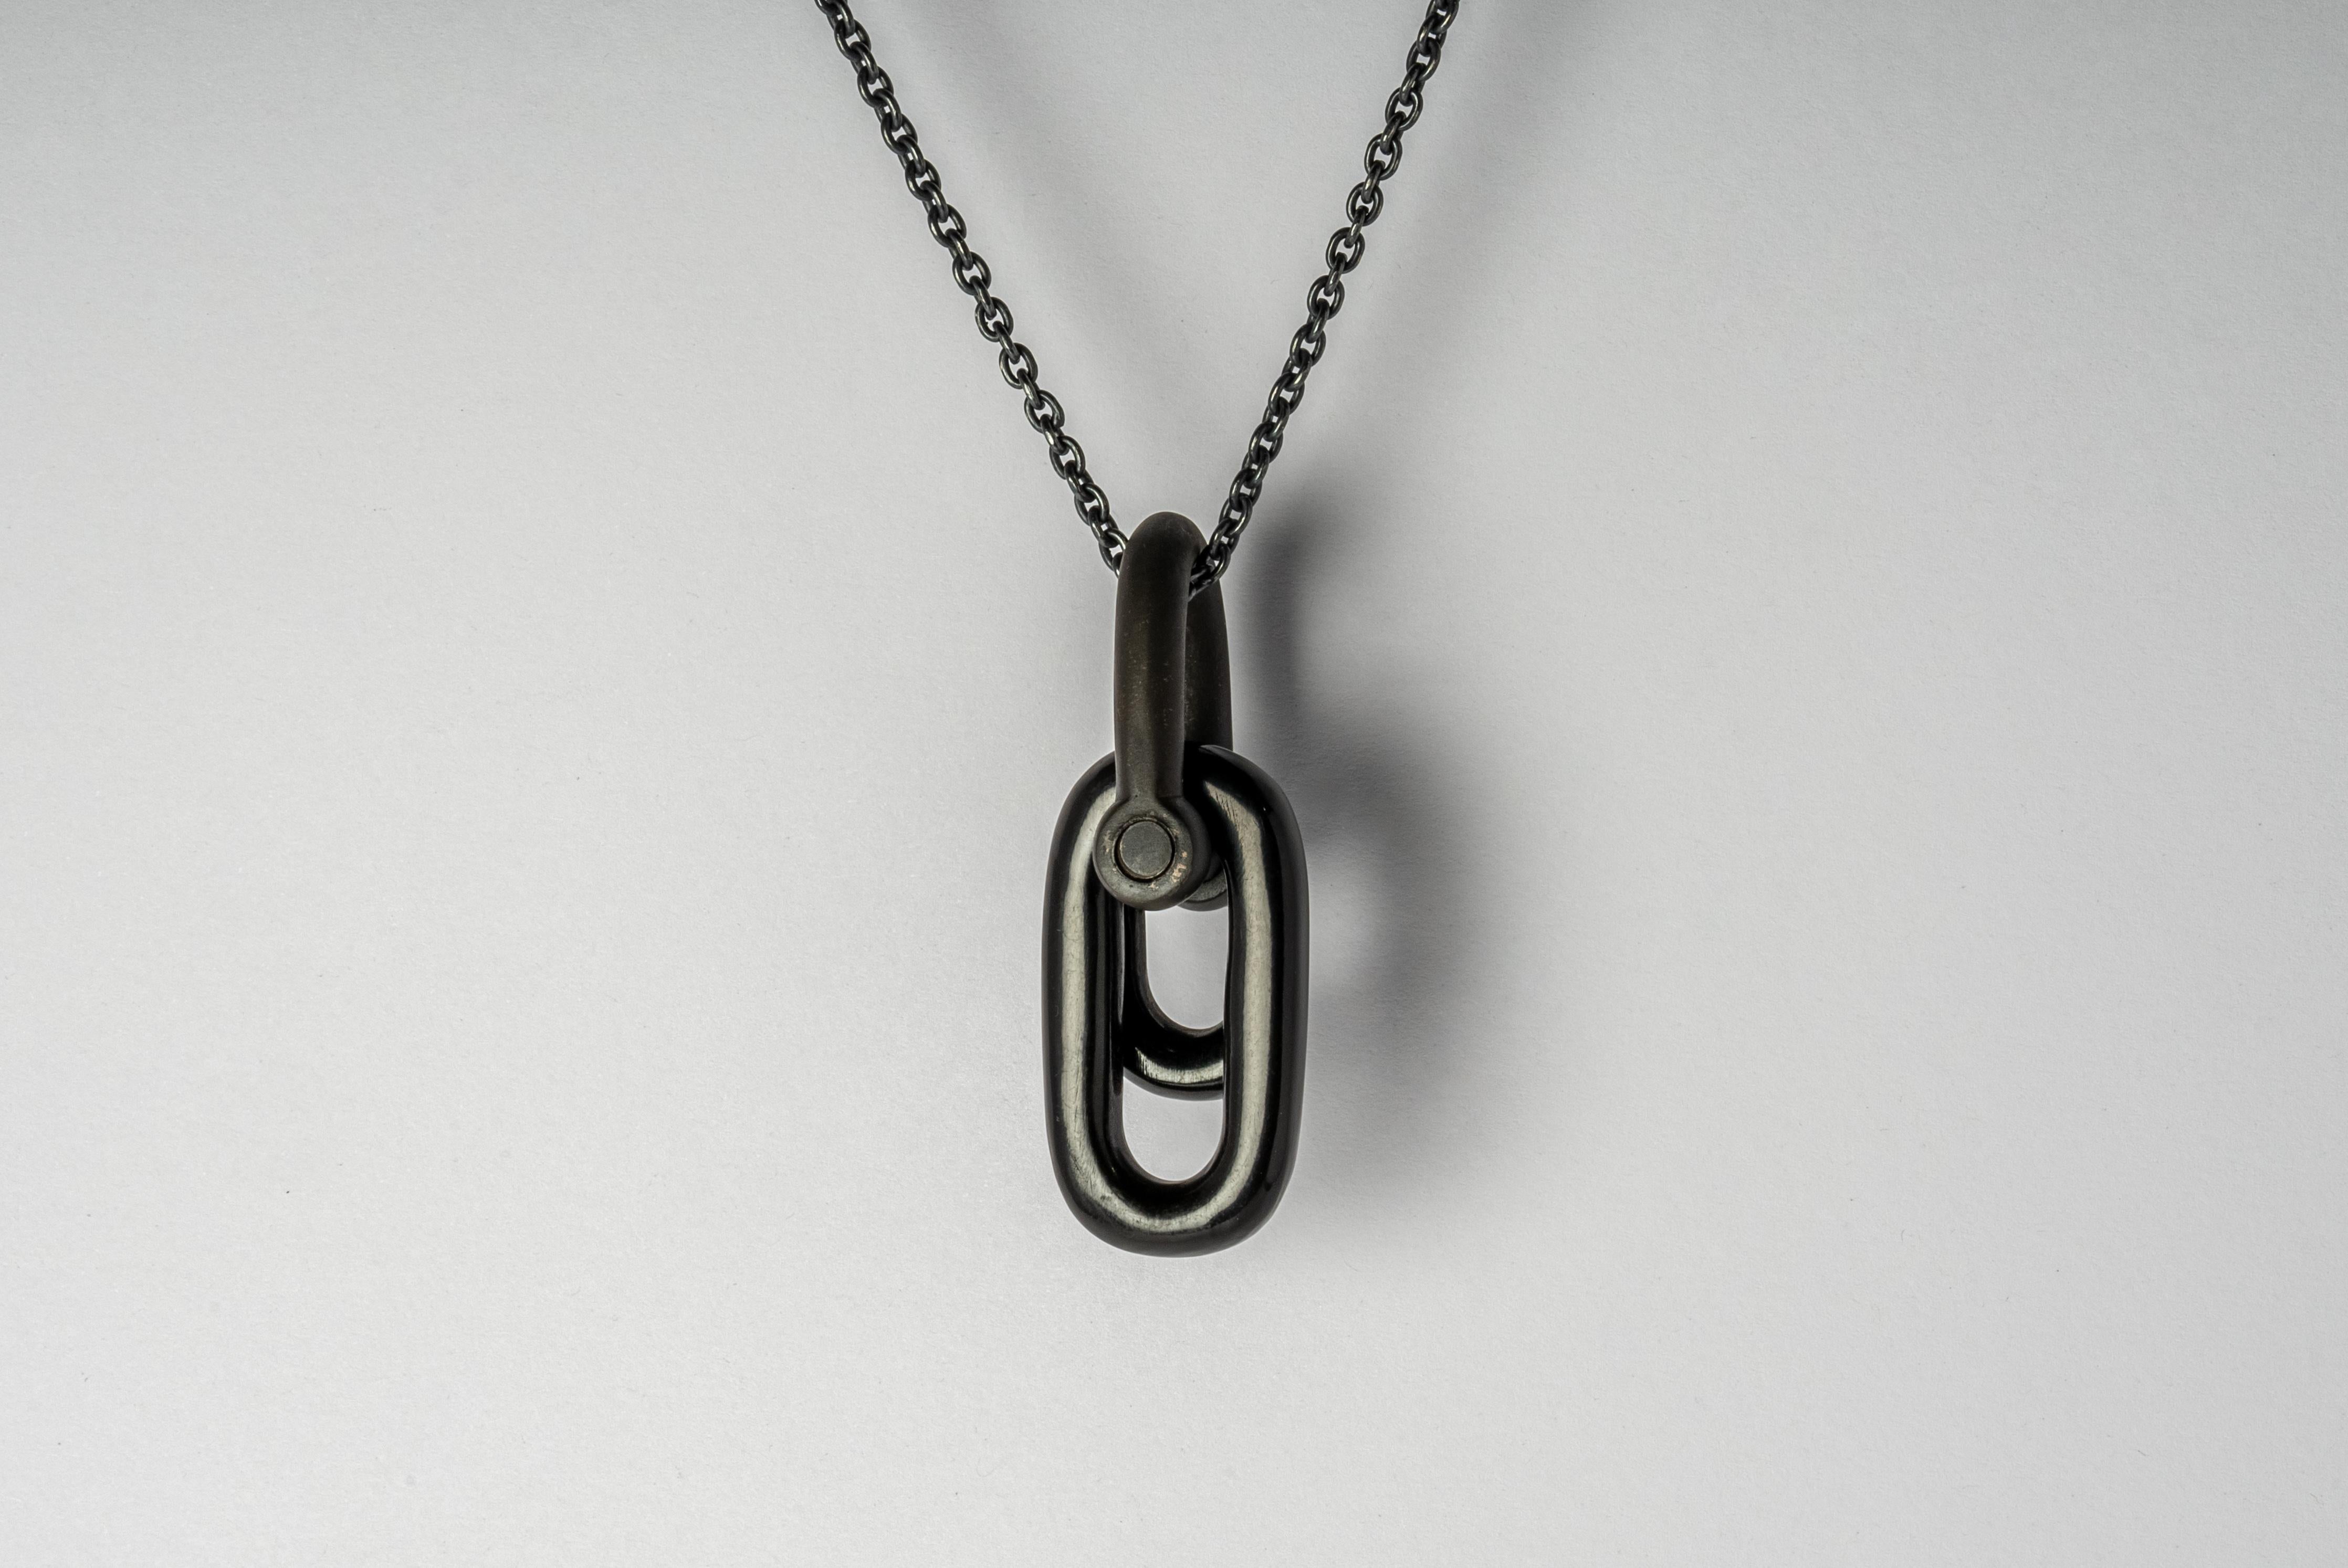 Double Link U-Bolt Necklace (H+KZ+KA) In New Condition For Sale In Hong Kong, Hong Kong Island